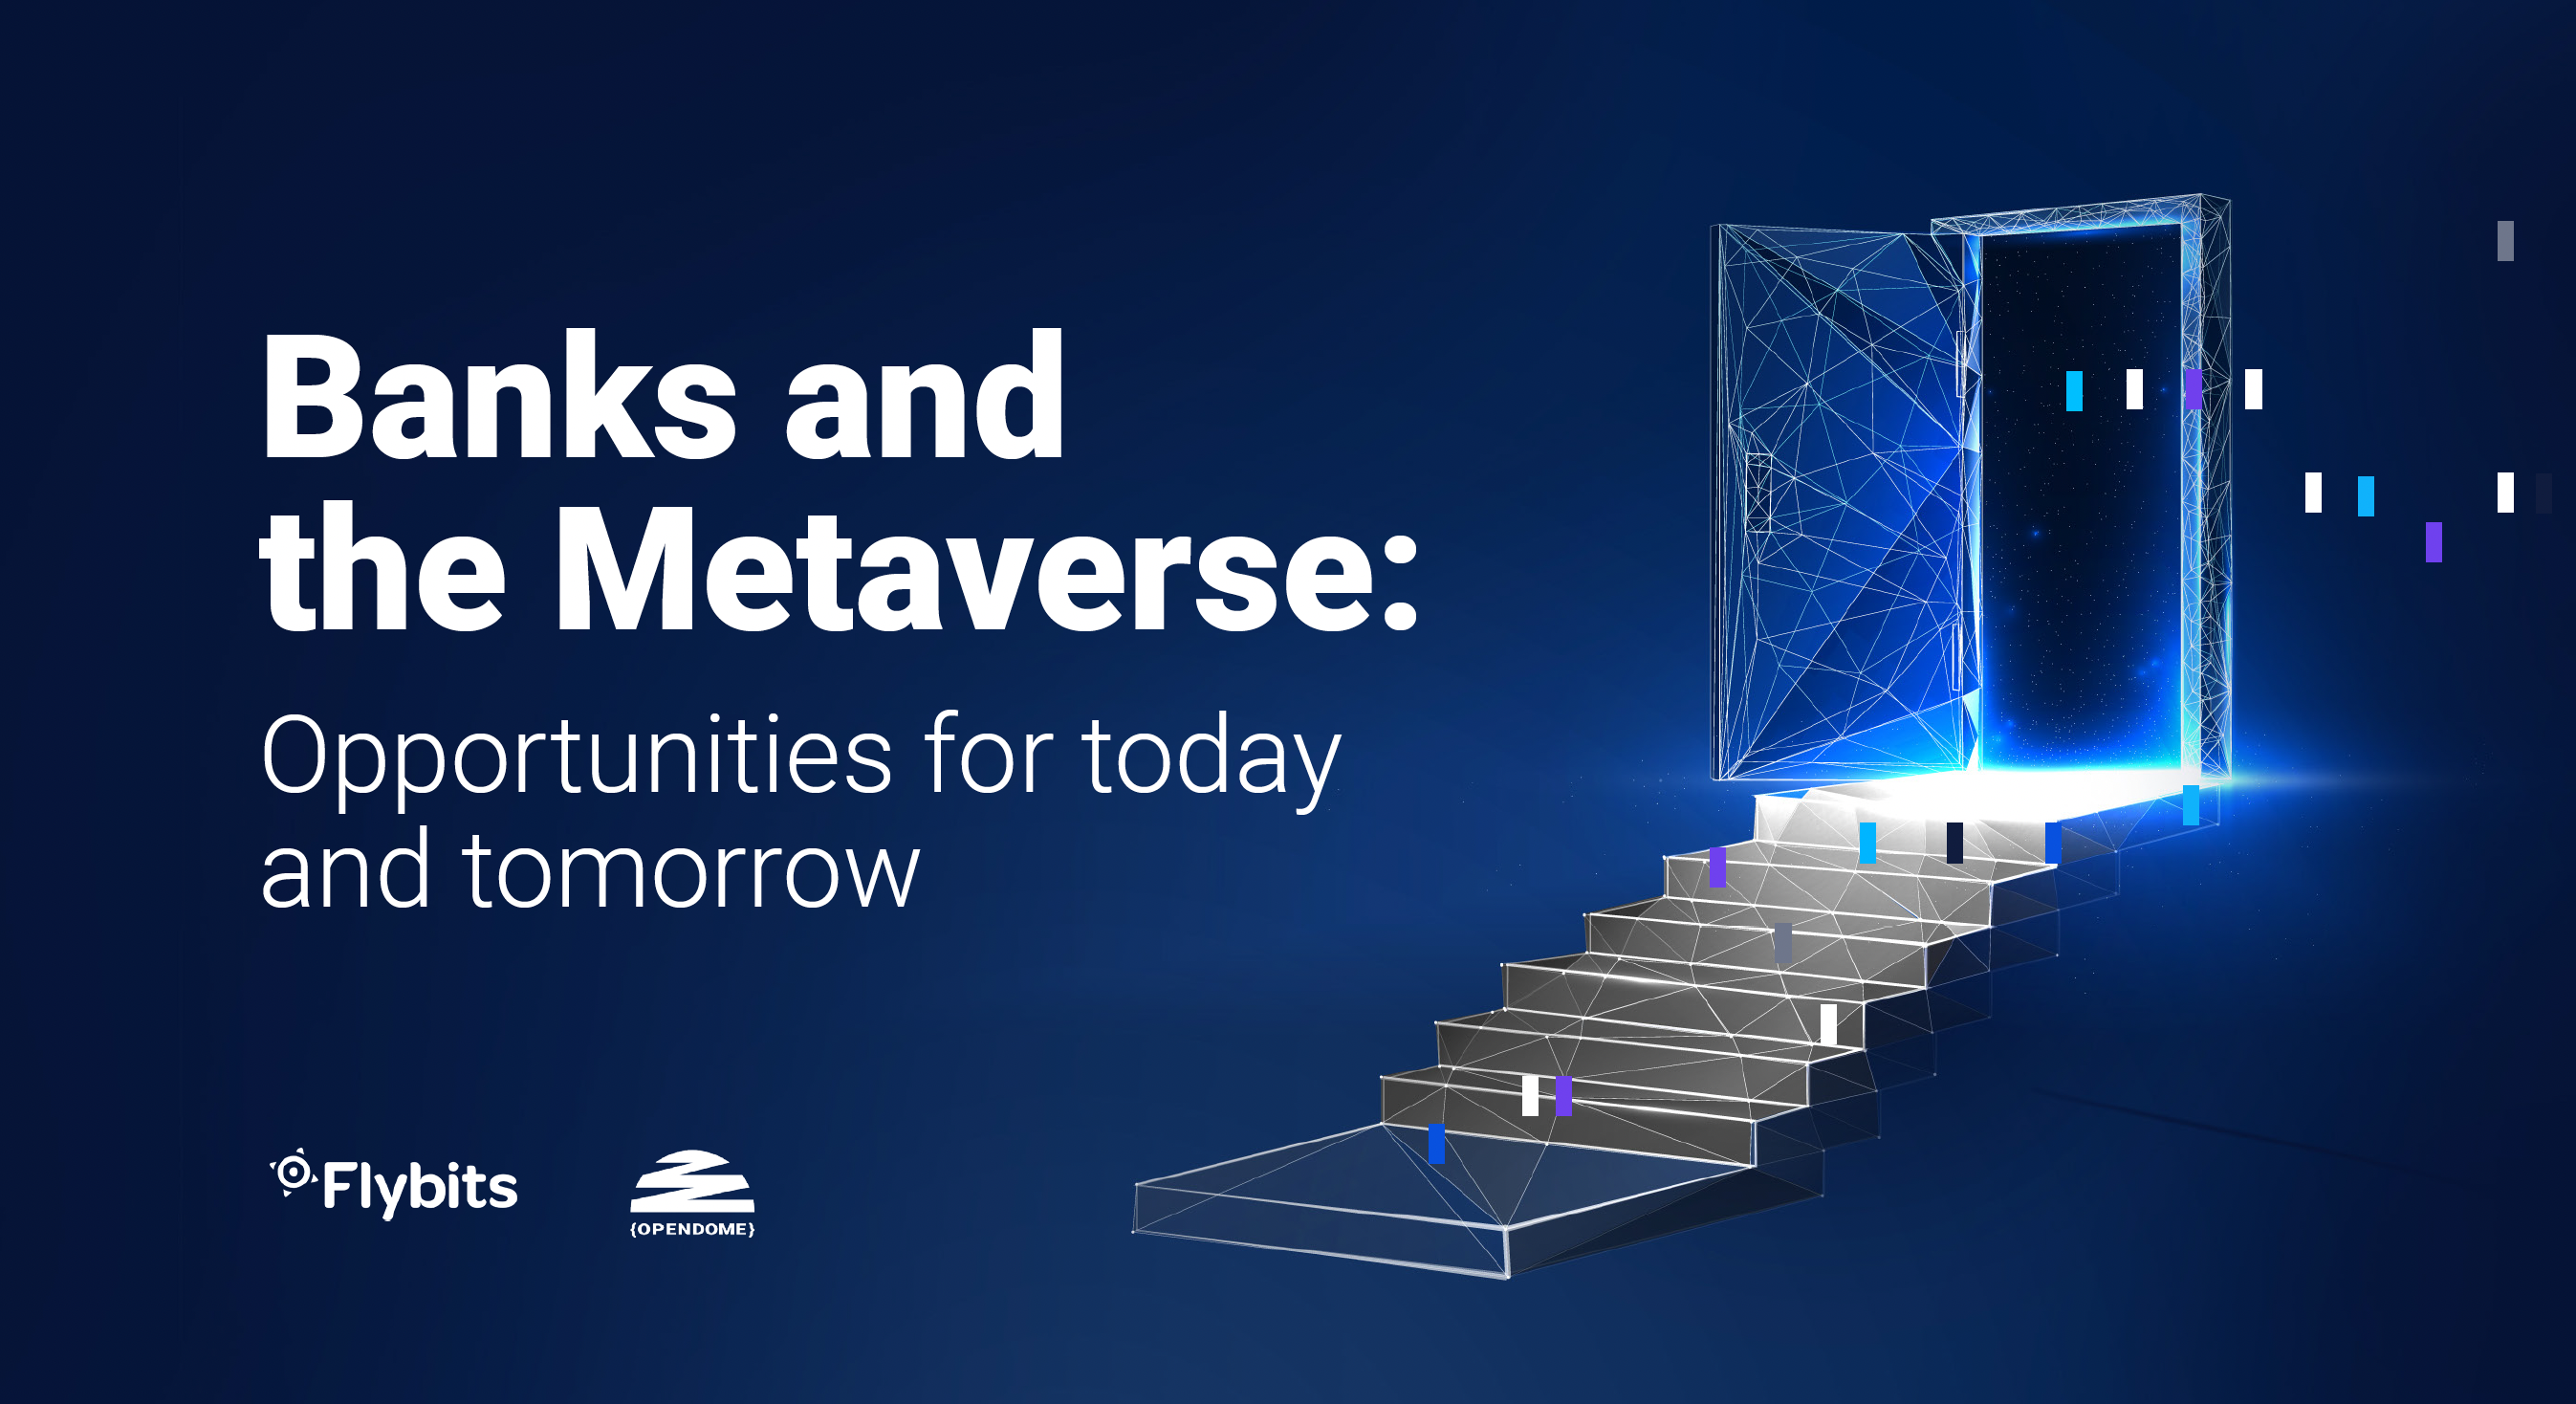 WhitePaper Title 'Banks and the Metaverse'